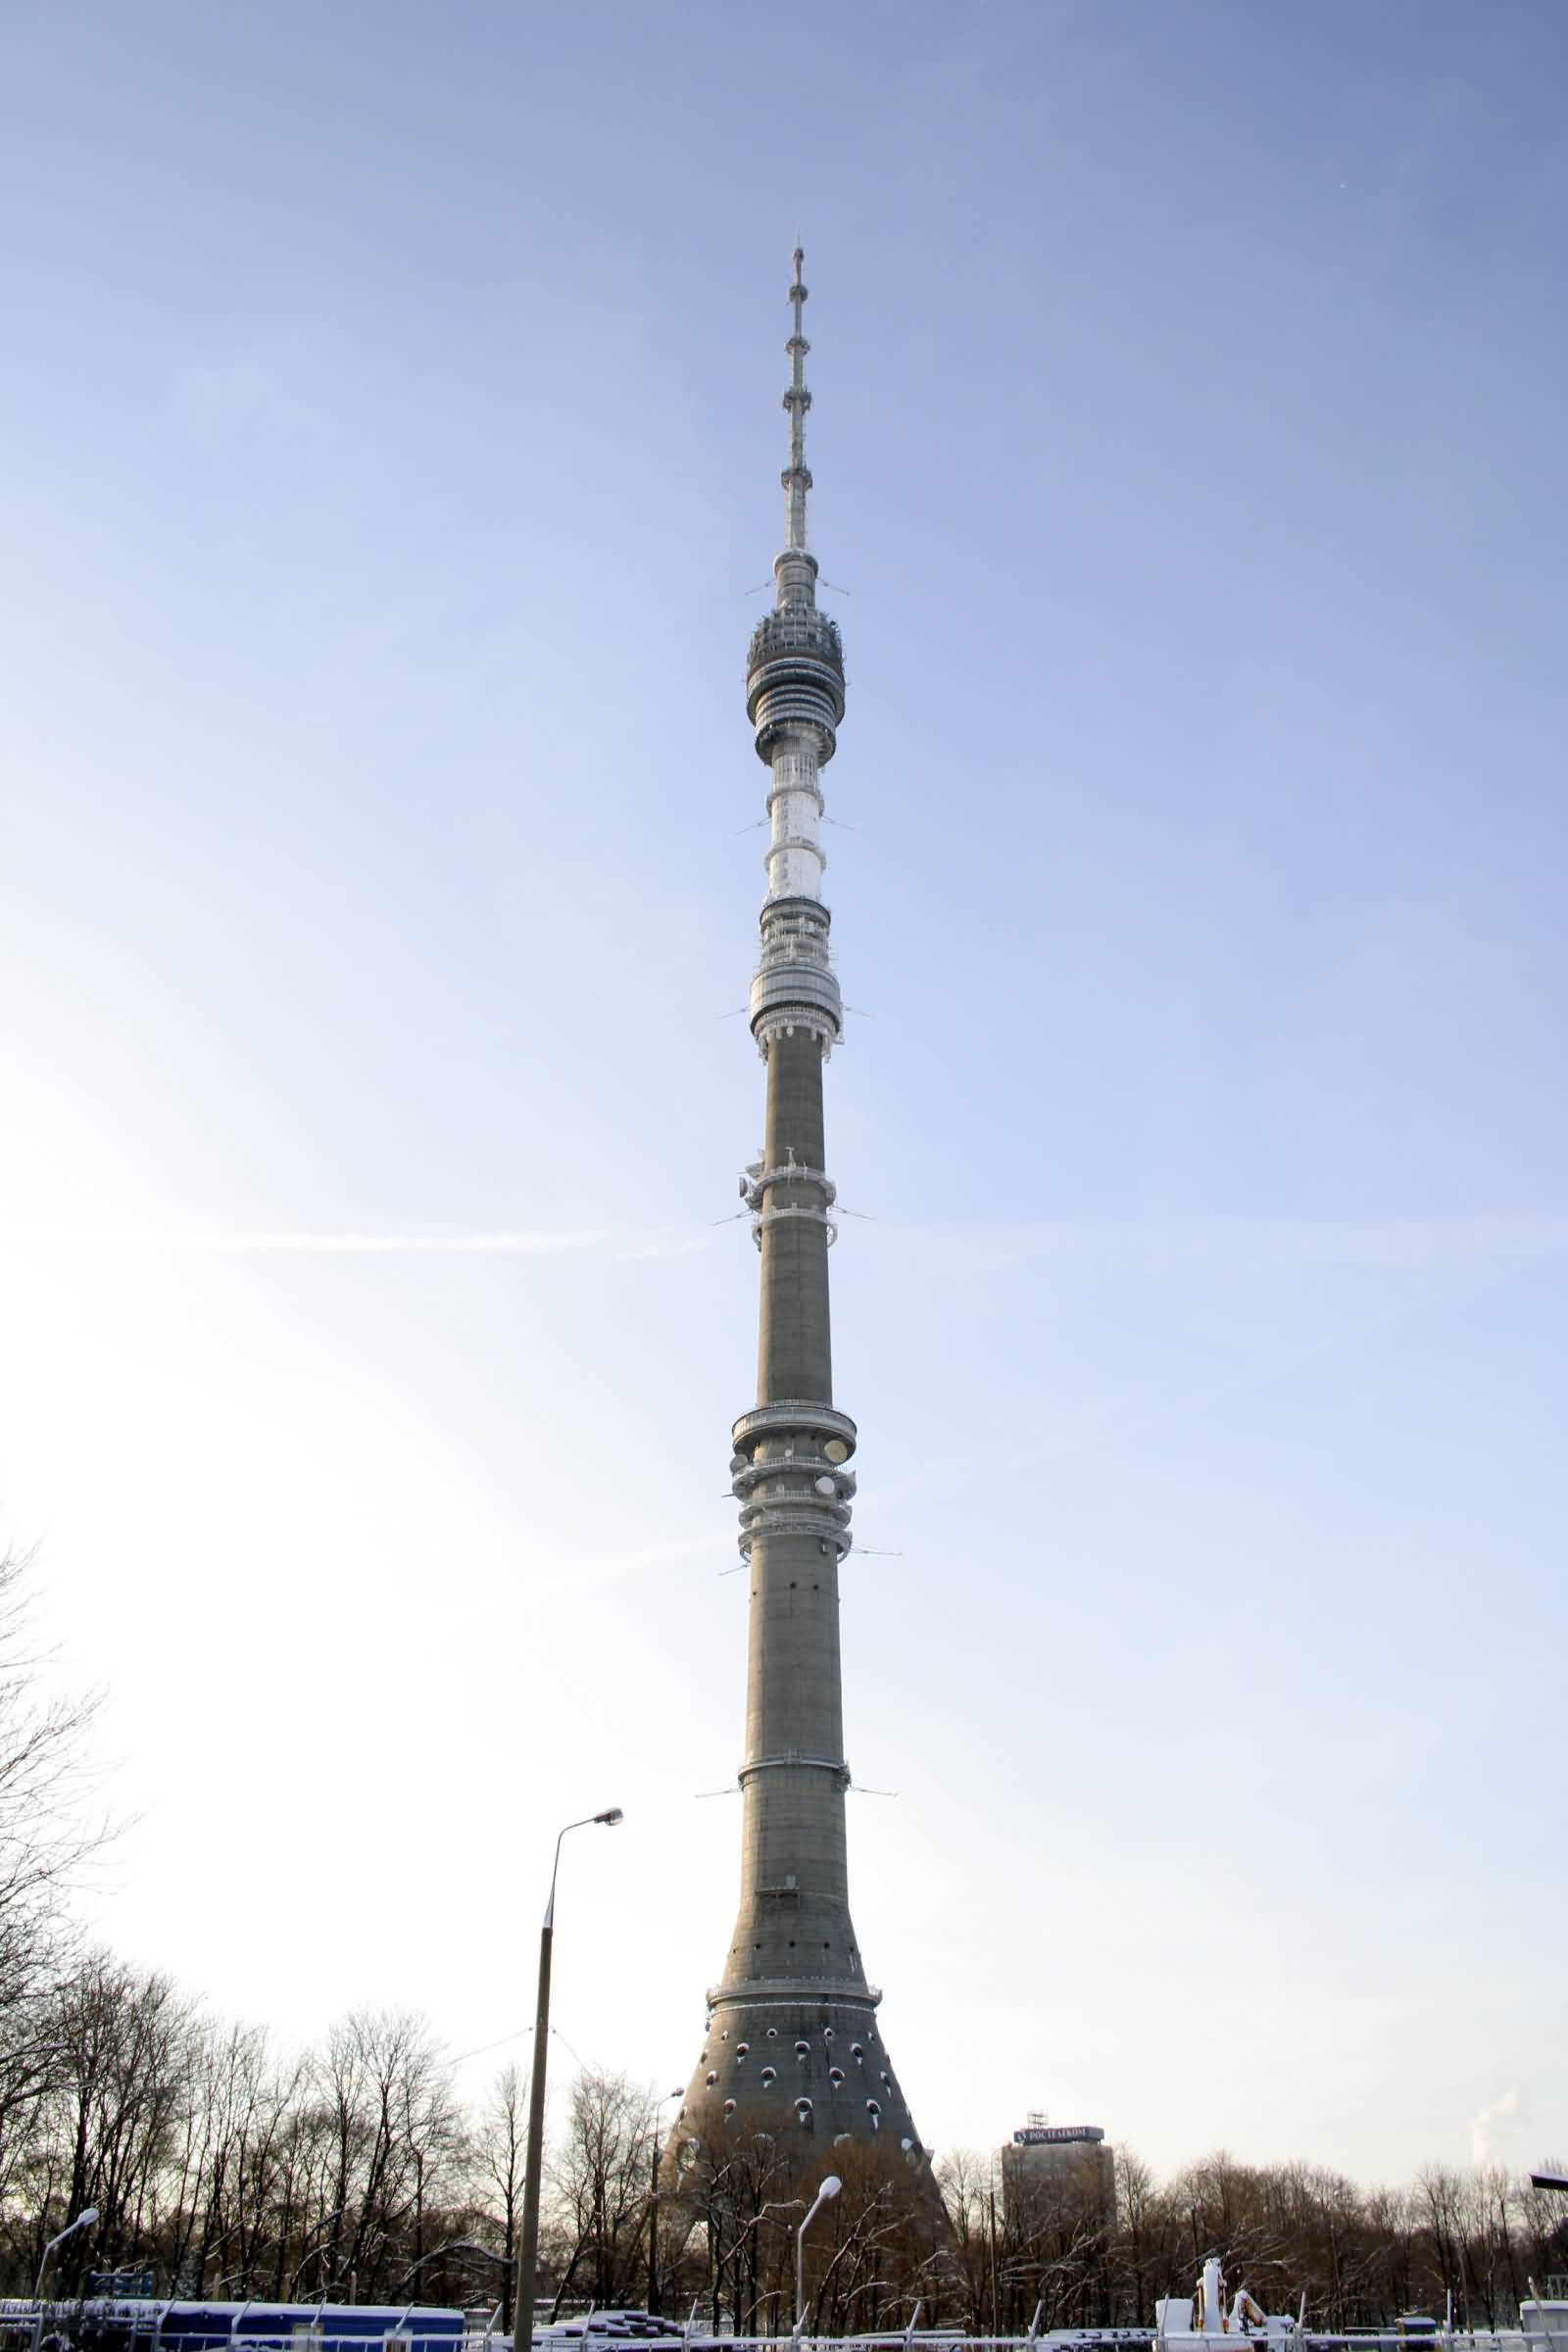 The Ostankino Tower In Moscow, Russia